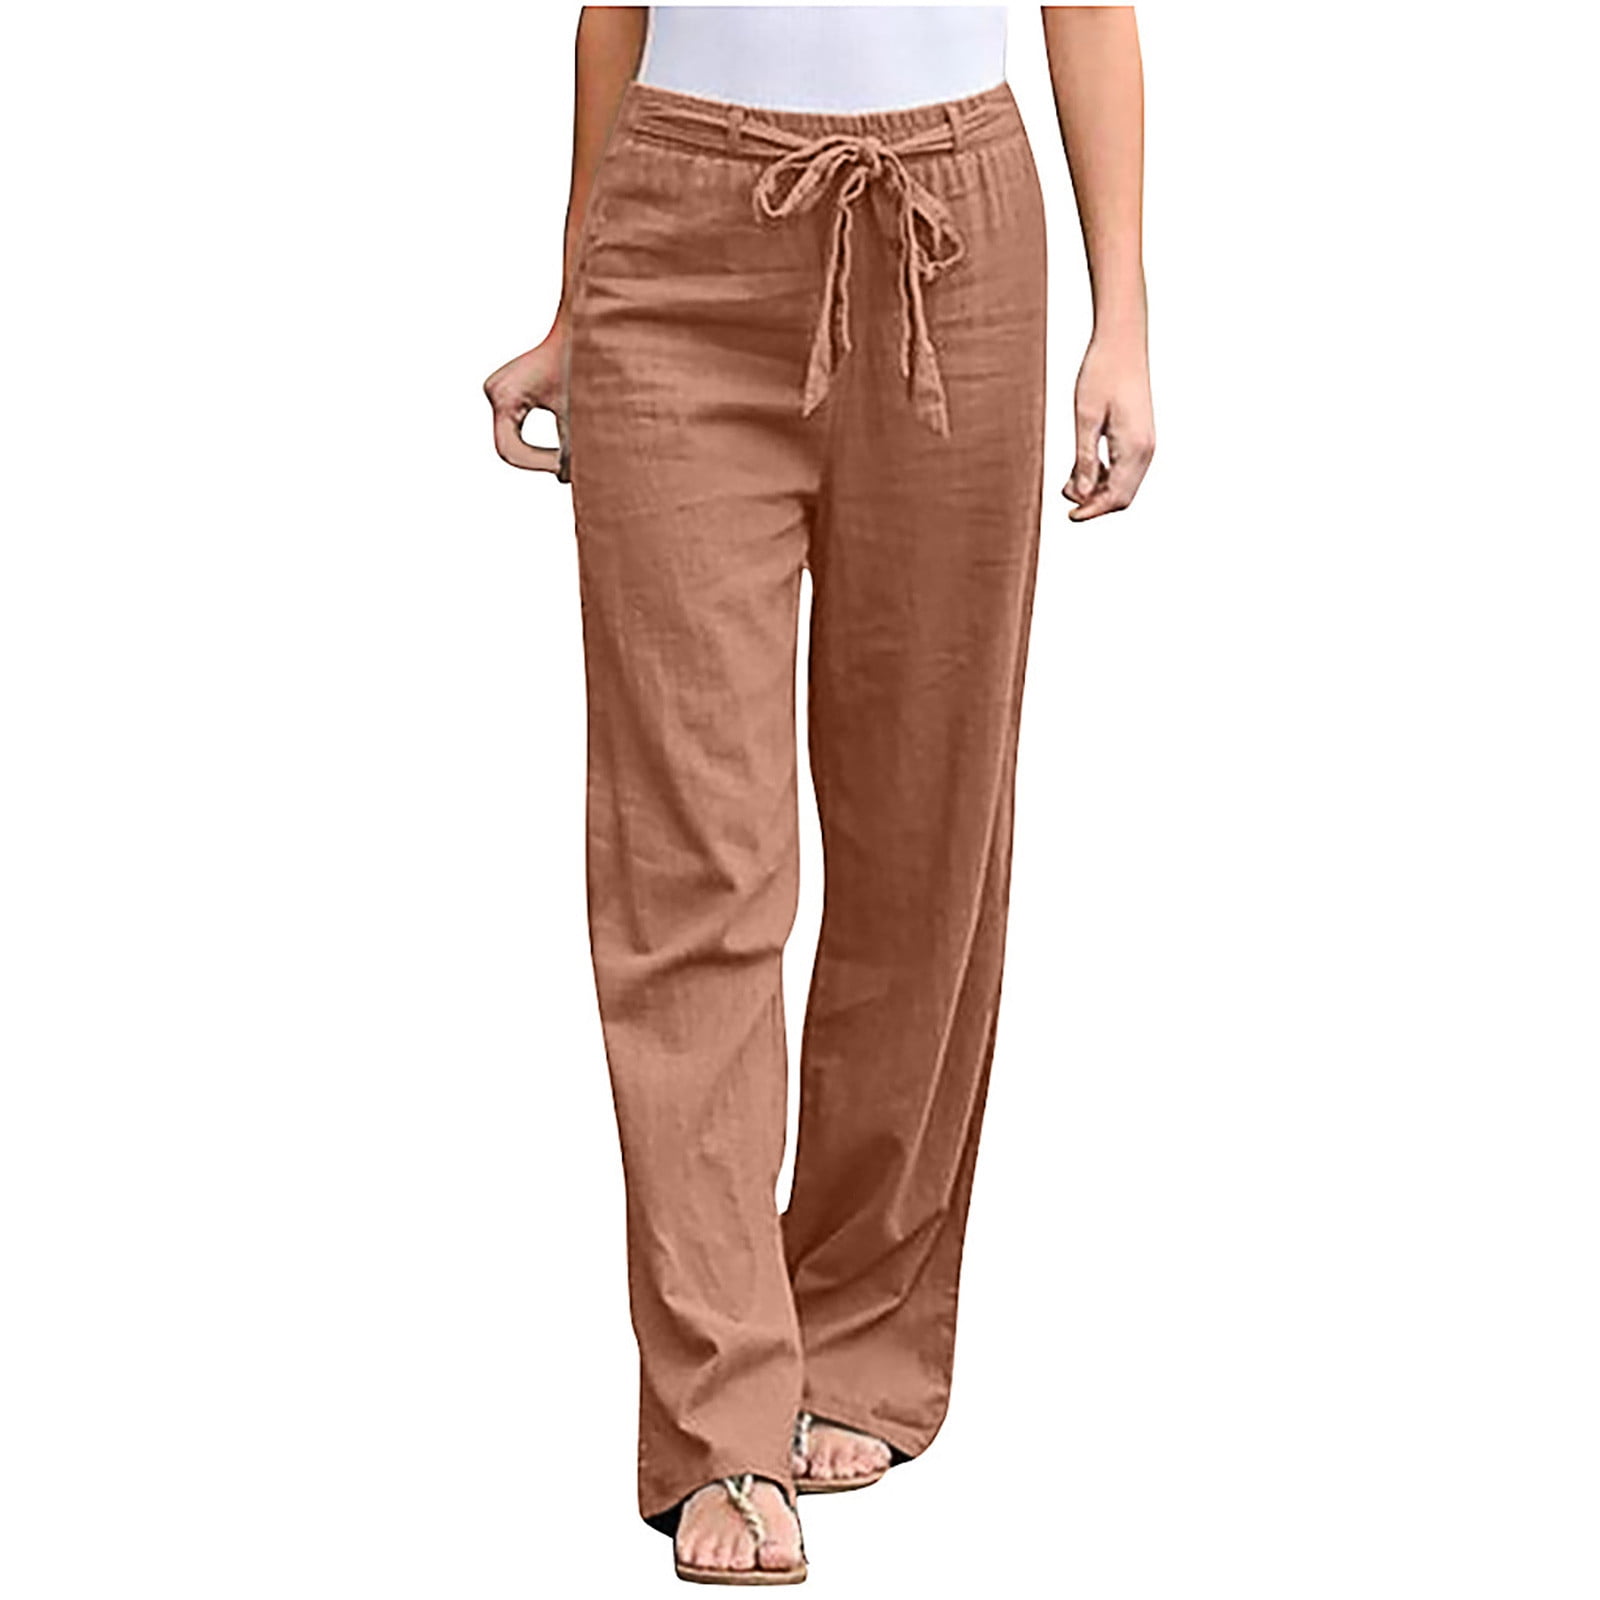 KIHOUT Clearance Women's Plus Size Pants Solid Color Linen Sashes Straight  CasualLong Pants Trousers 